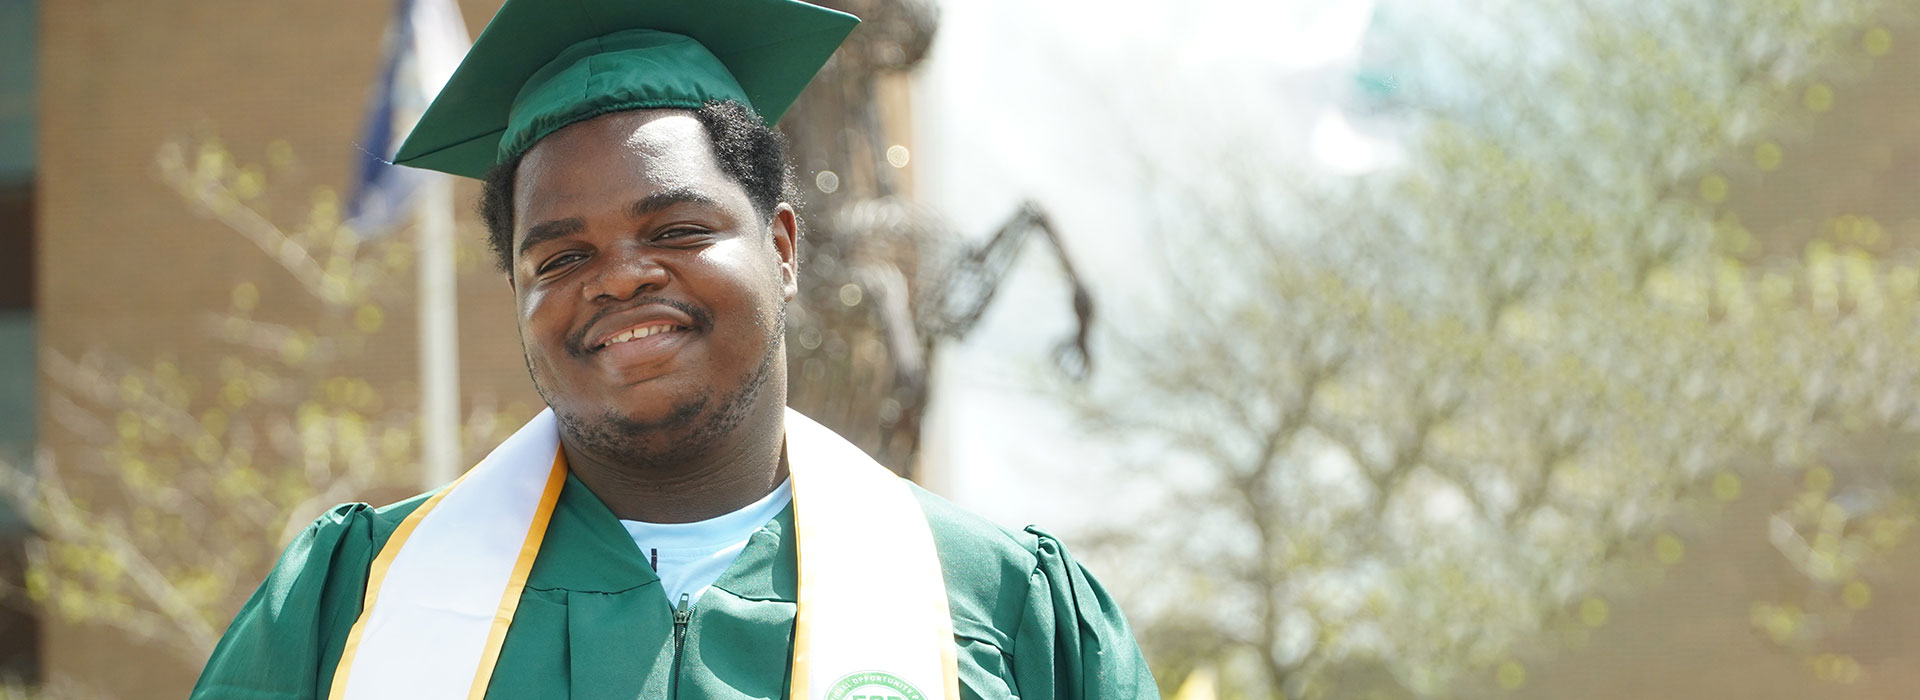 a SUNY Morrisville student attends commencement